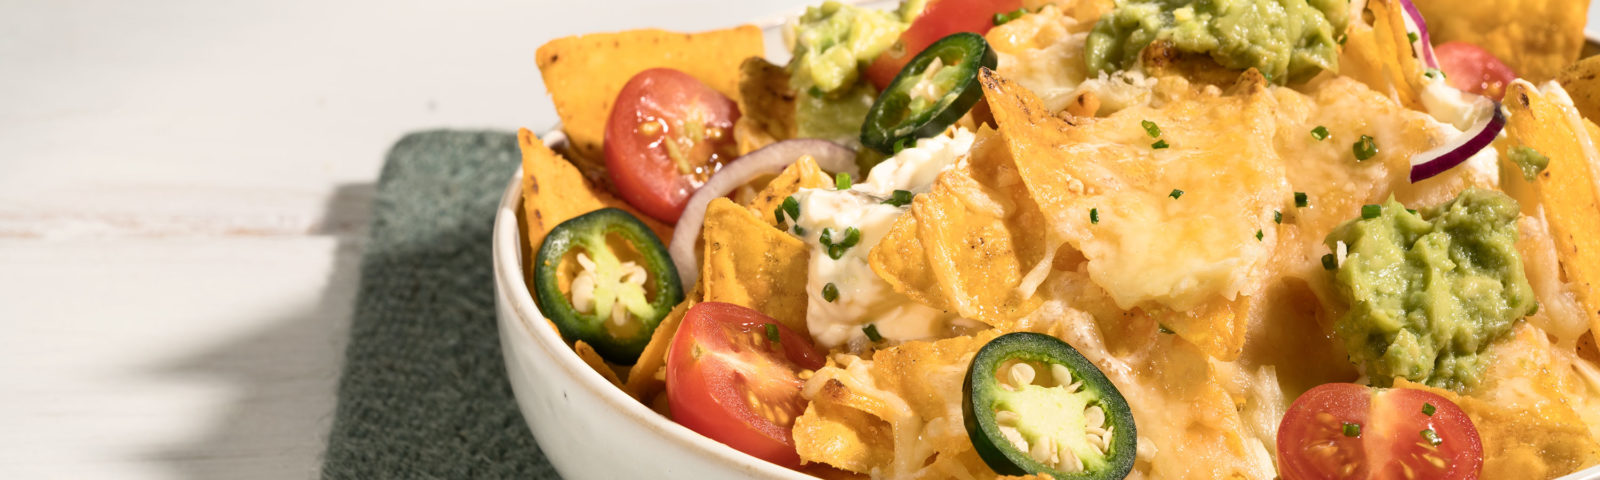 Delicious nachos from the oven